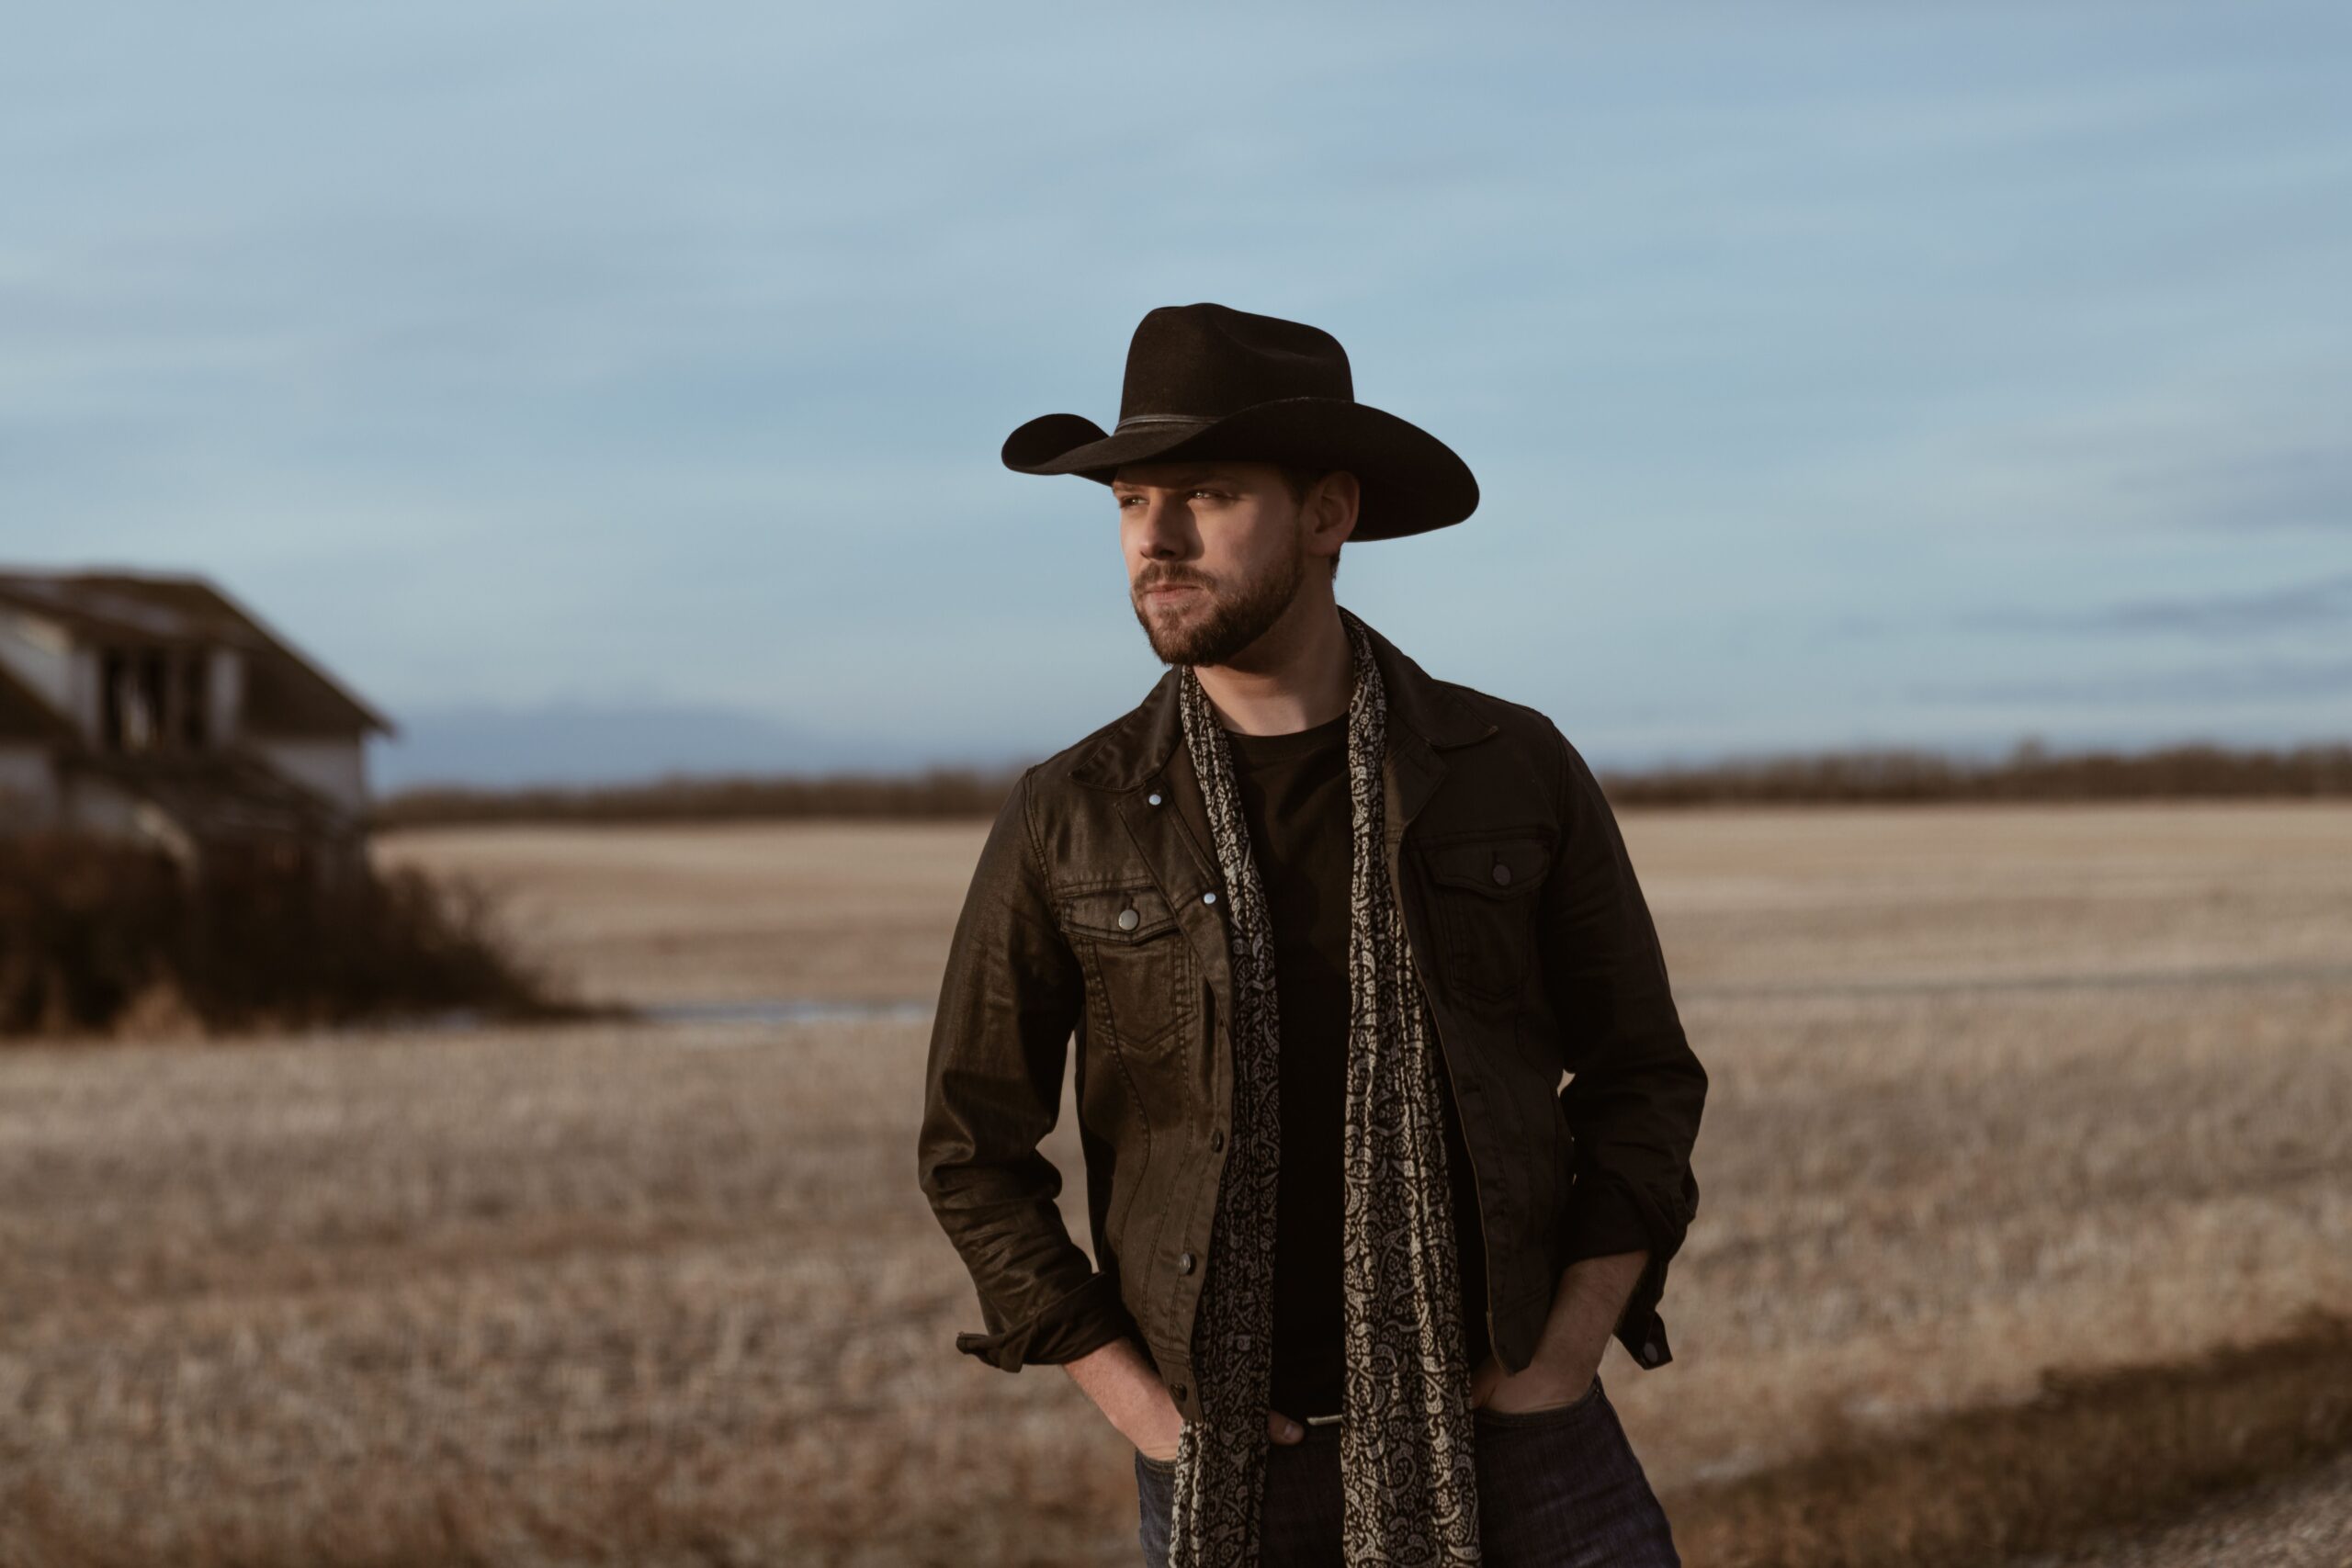 Brett Kissel Teams Up With Nelly to Bring the Party With “She Drives Me Crazy [DND Remix]” (Exclusive)